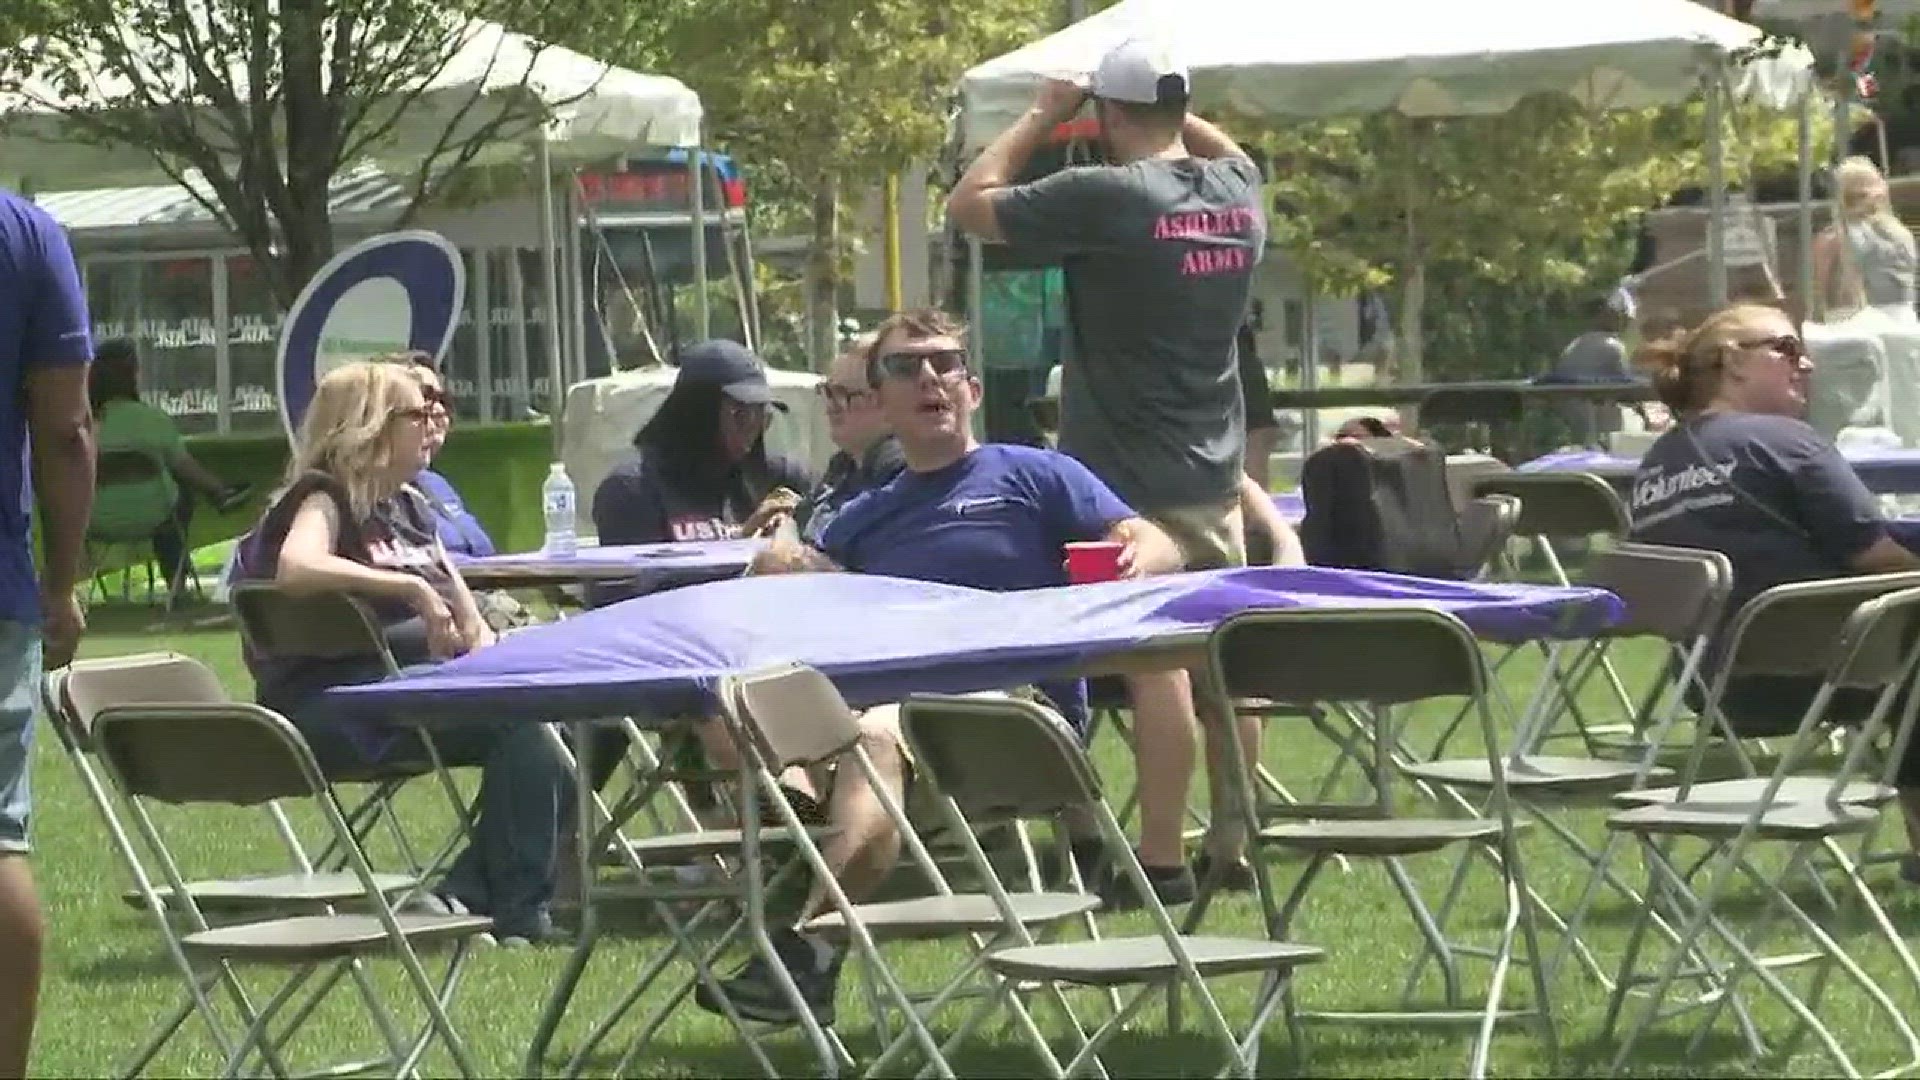 Relay for Life held at Public Square